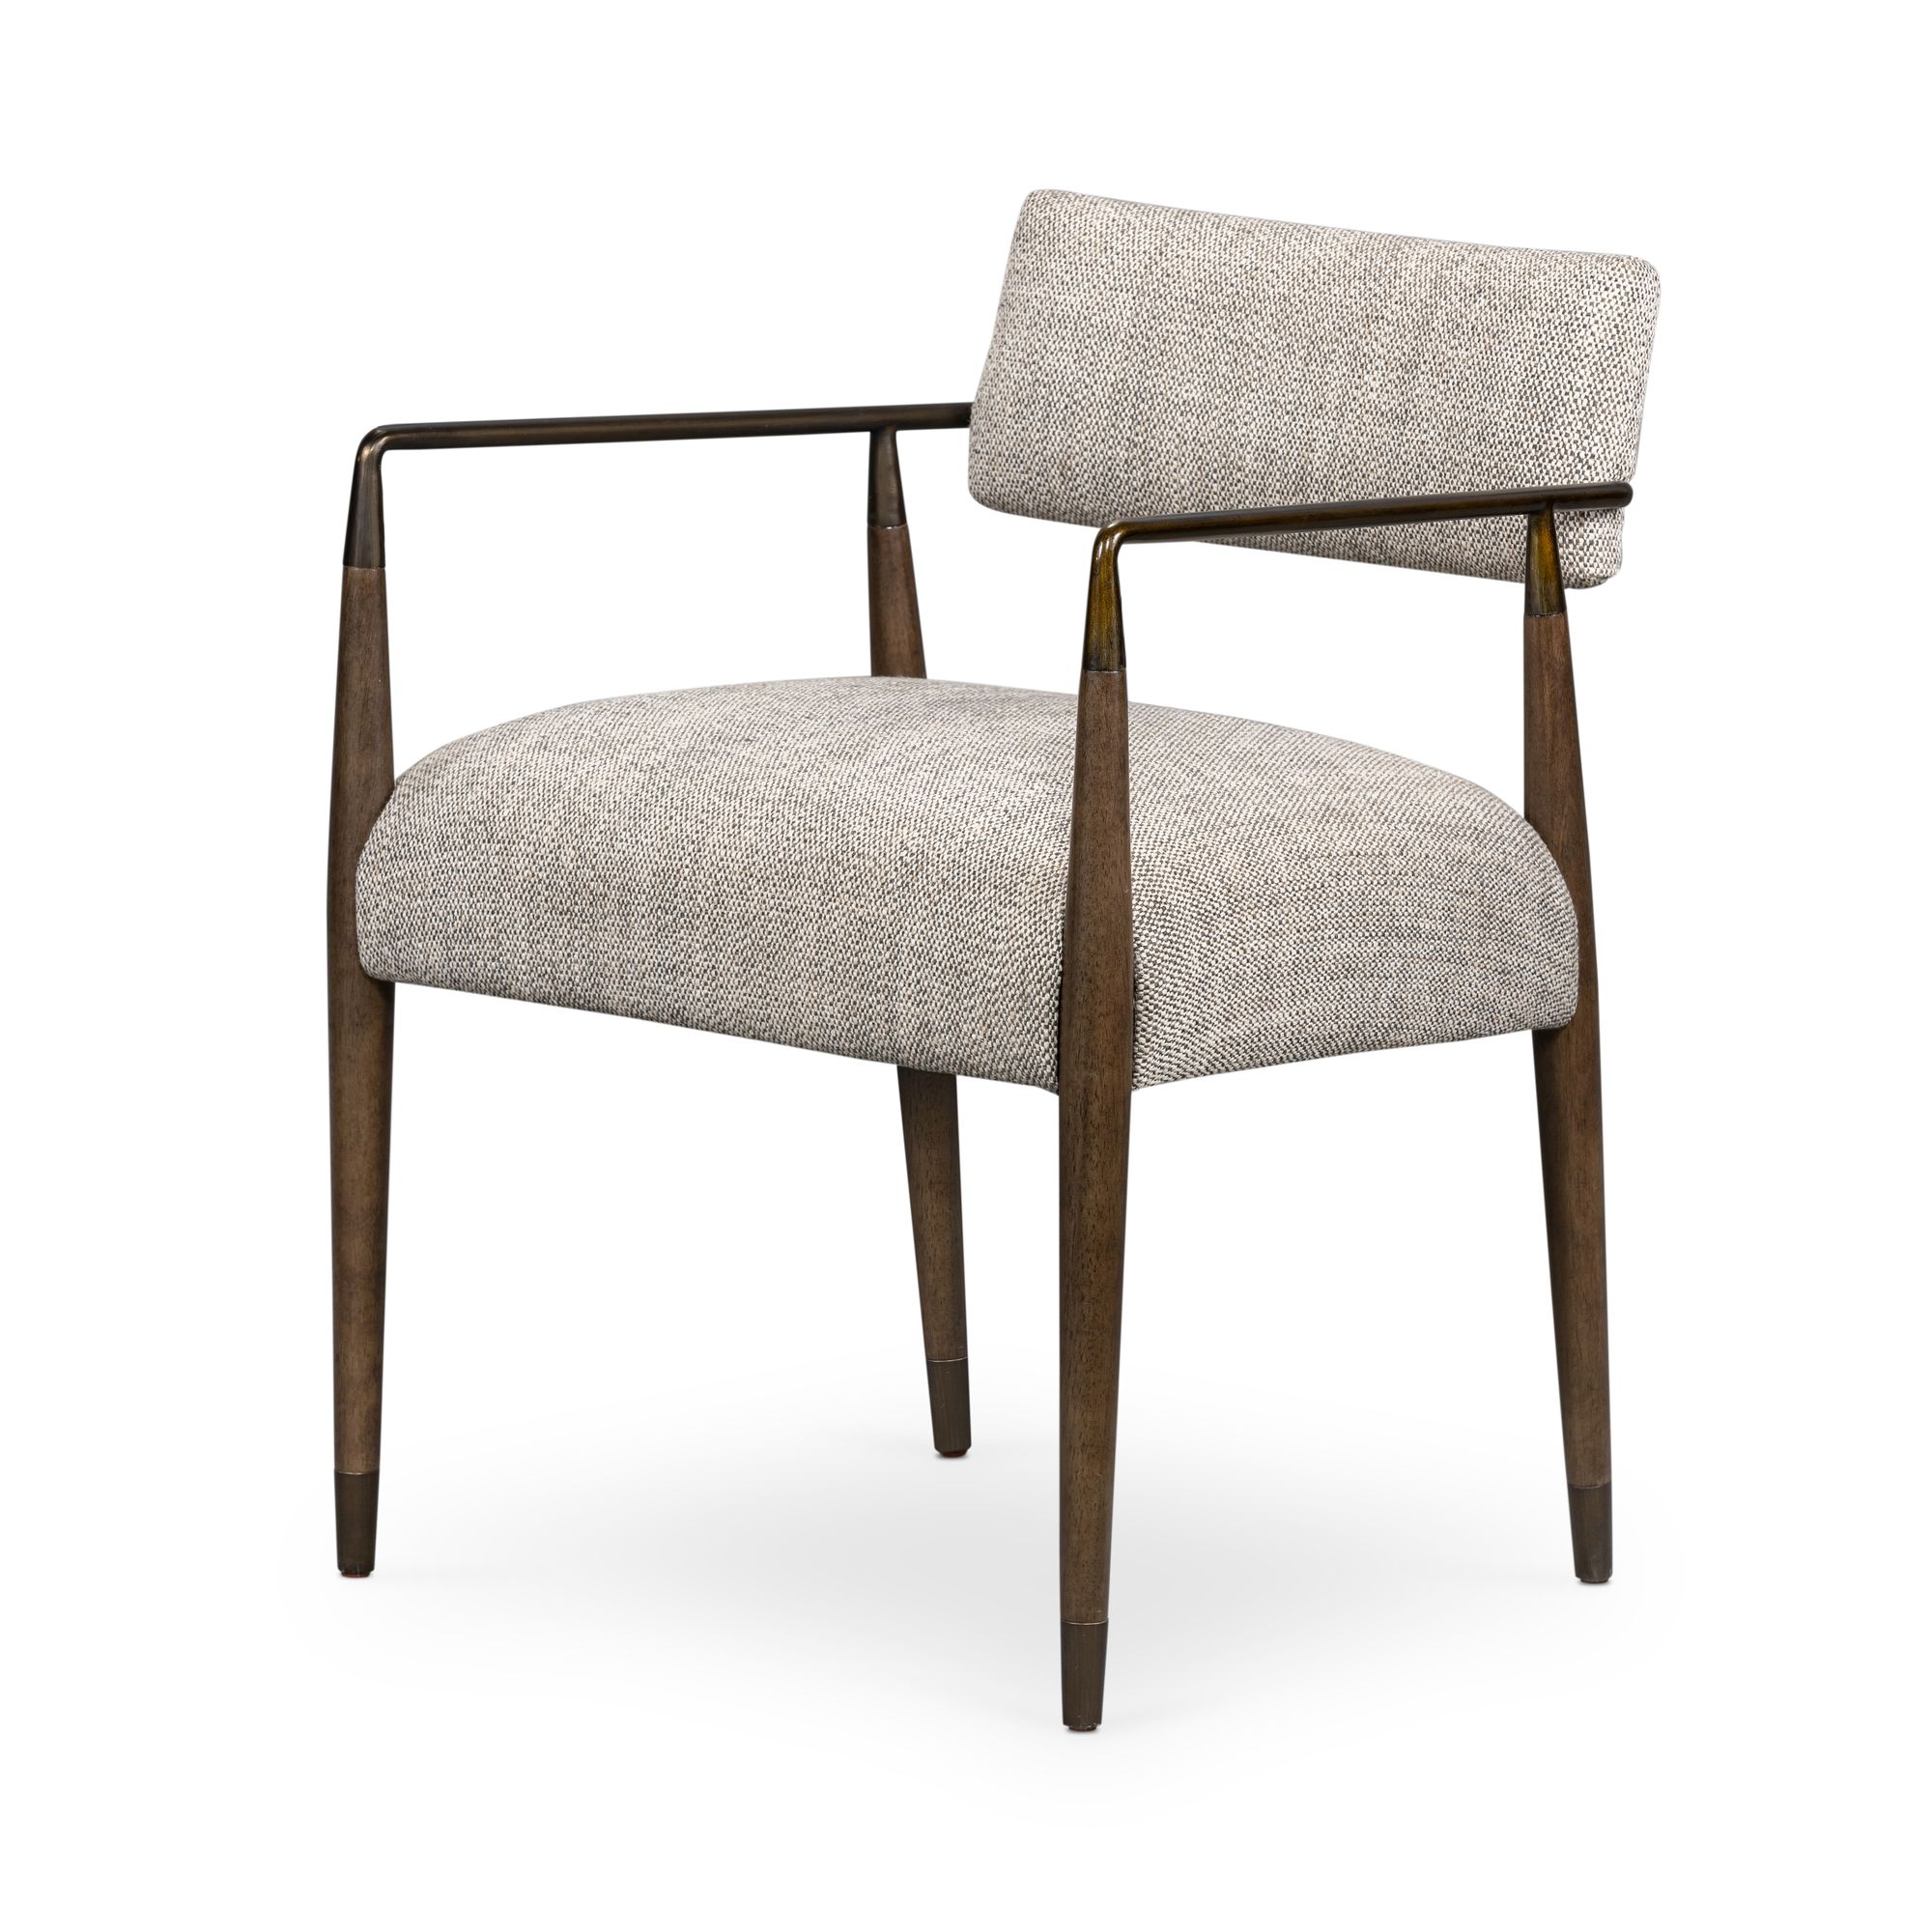 Lulu Dining Chair-Espresso Leather Blend at